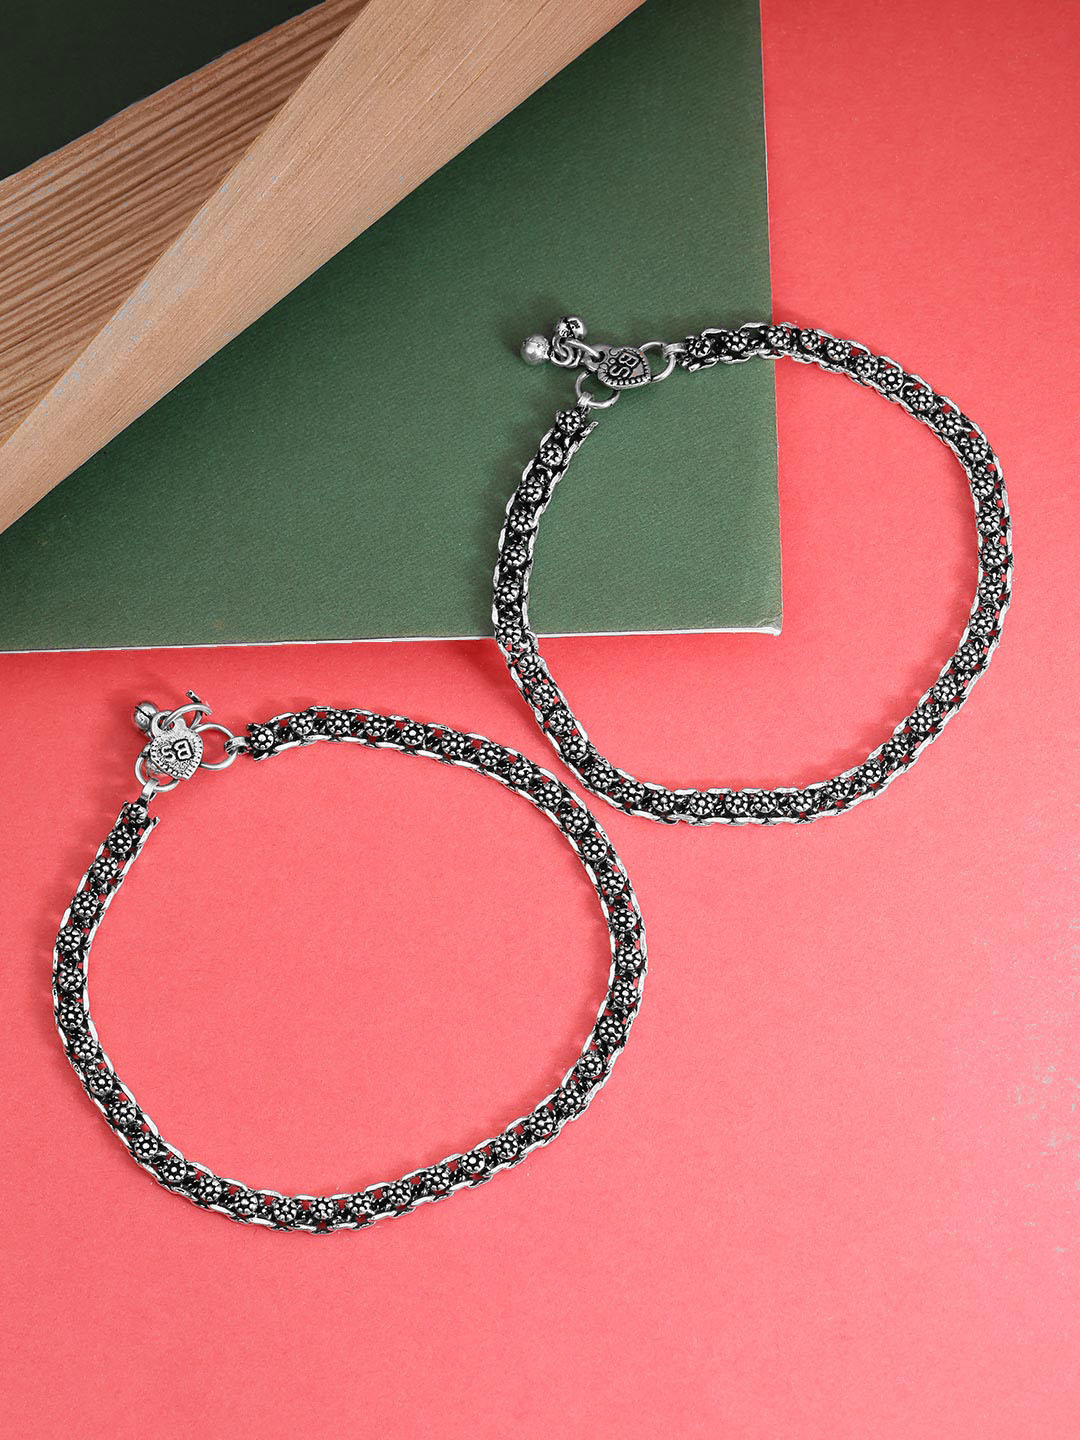 Oxidised Silver-Toned Anklets For Women And Girls